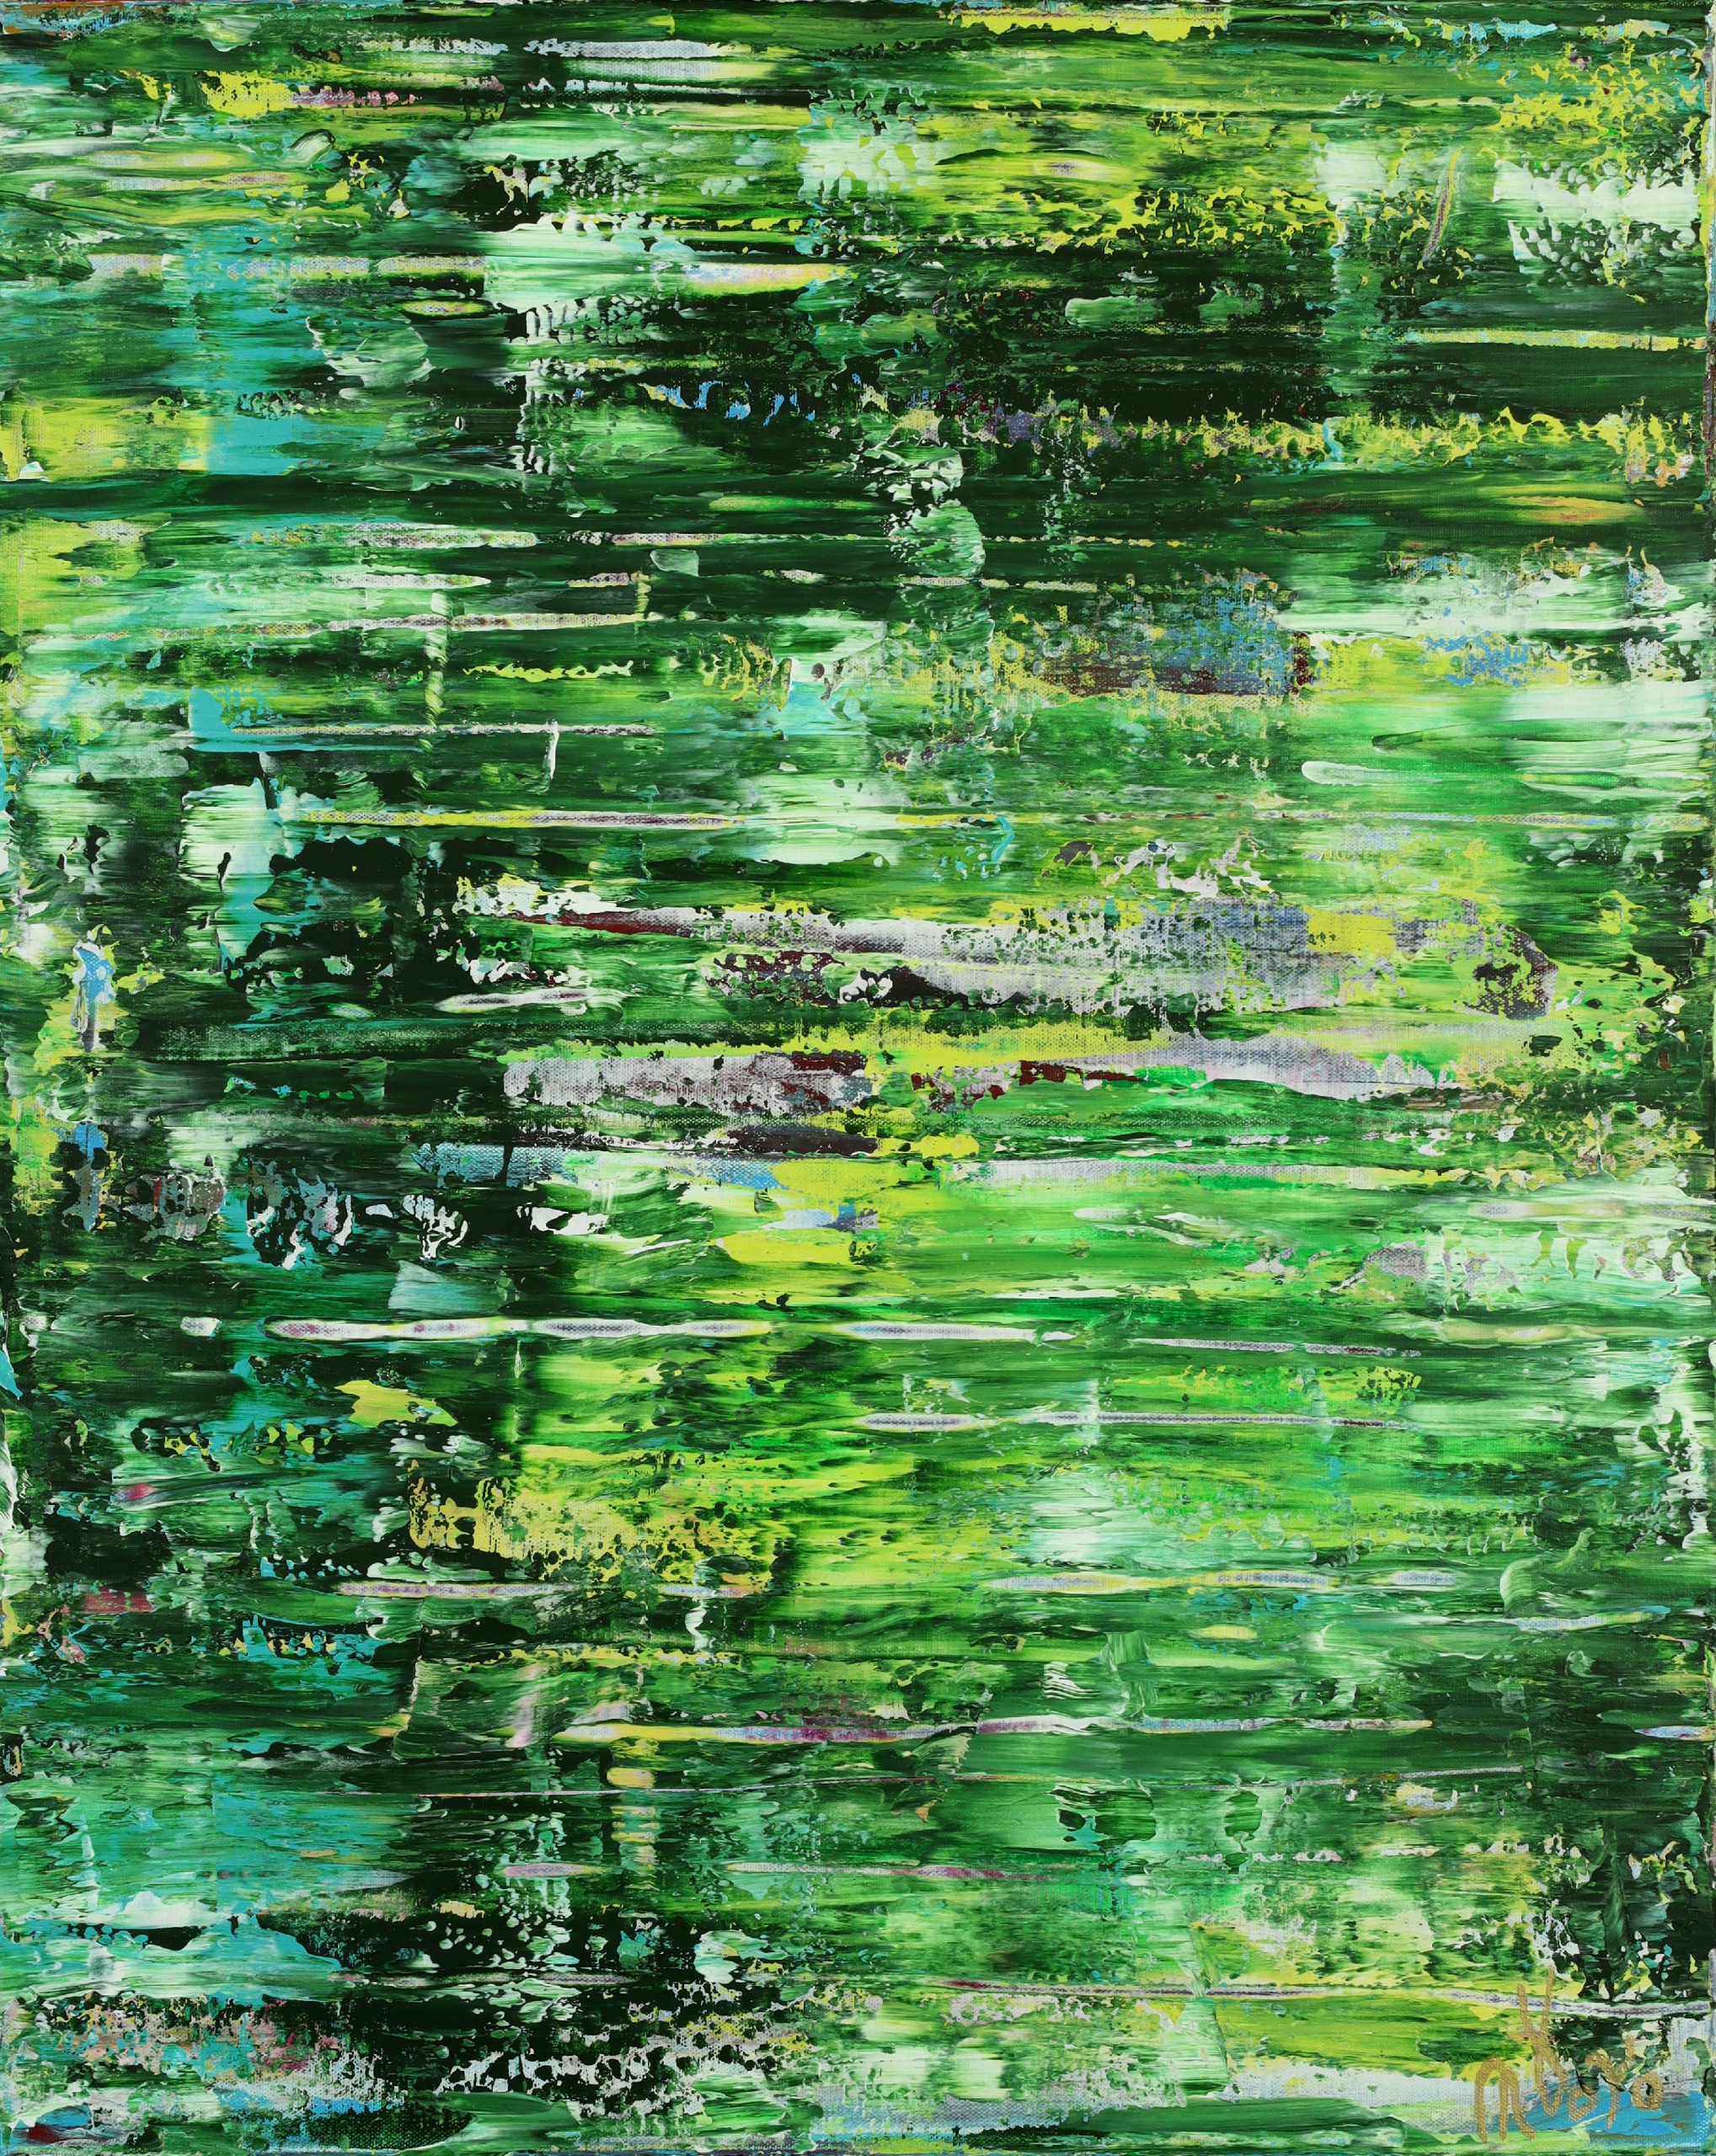 A Forest Song (Faces of Green) 5 (2022) / 24x30 inches